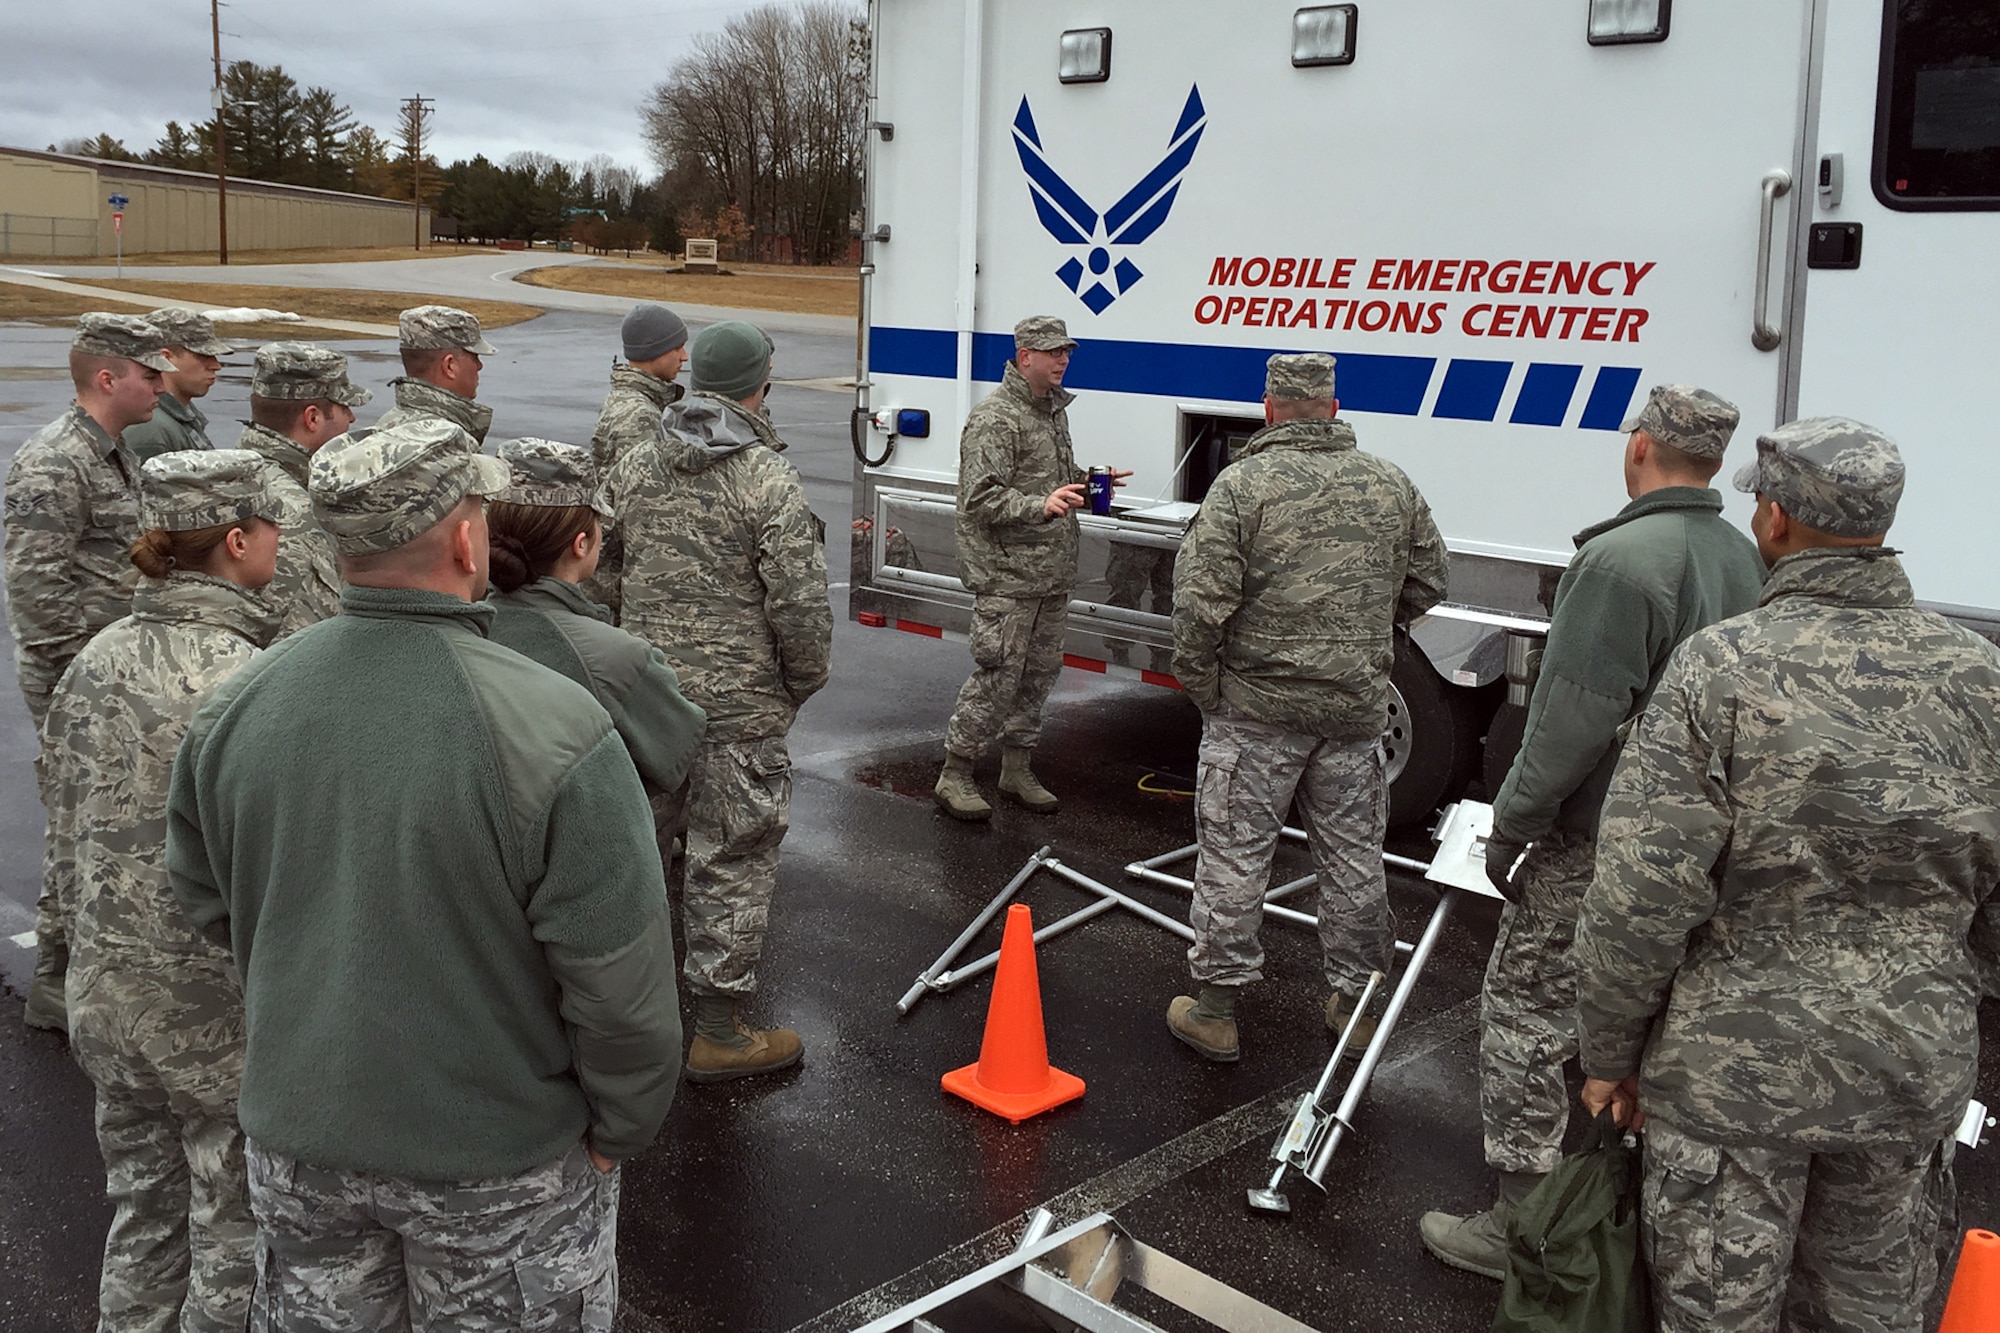 Senior Airman Aric Kaufmann, an emergency management specialist with the 127th Civil Engineer Squadron, briefs a group of Airman on the capabilities of the Mobile Emergency Operations Center during a training session at the Alpena Combat Readiness Training Center, April 10, 2015. The vehicle, based at Selfridge Air National Guard Base, is one of two such MEOCs available to support civil authorities in the Upper Great Lakes region. (U.S. Air National Guard photo)